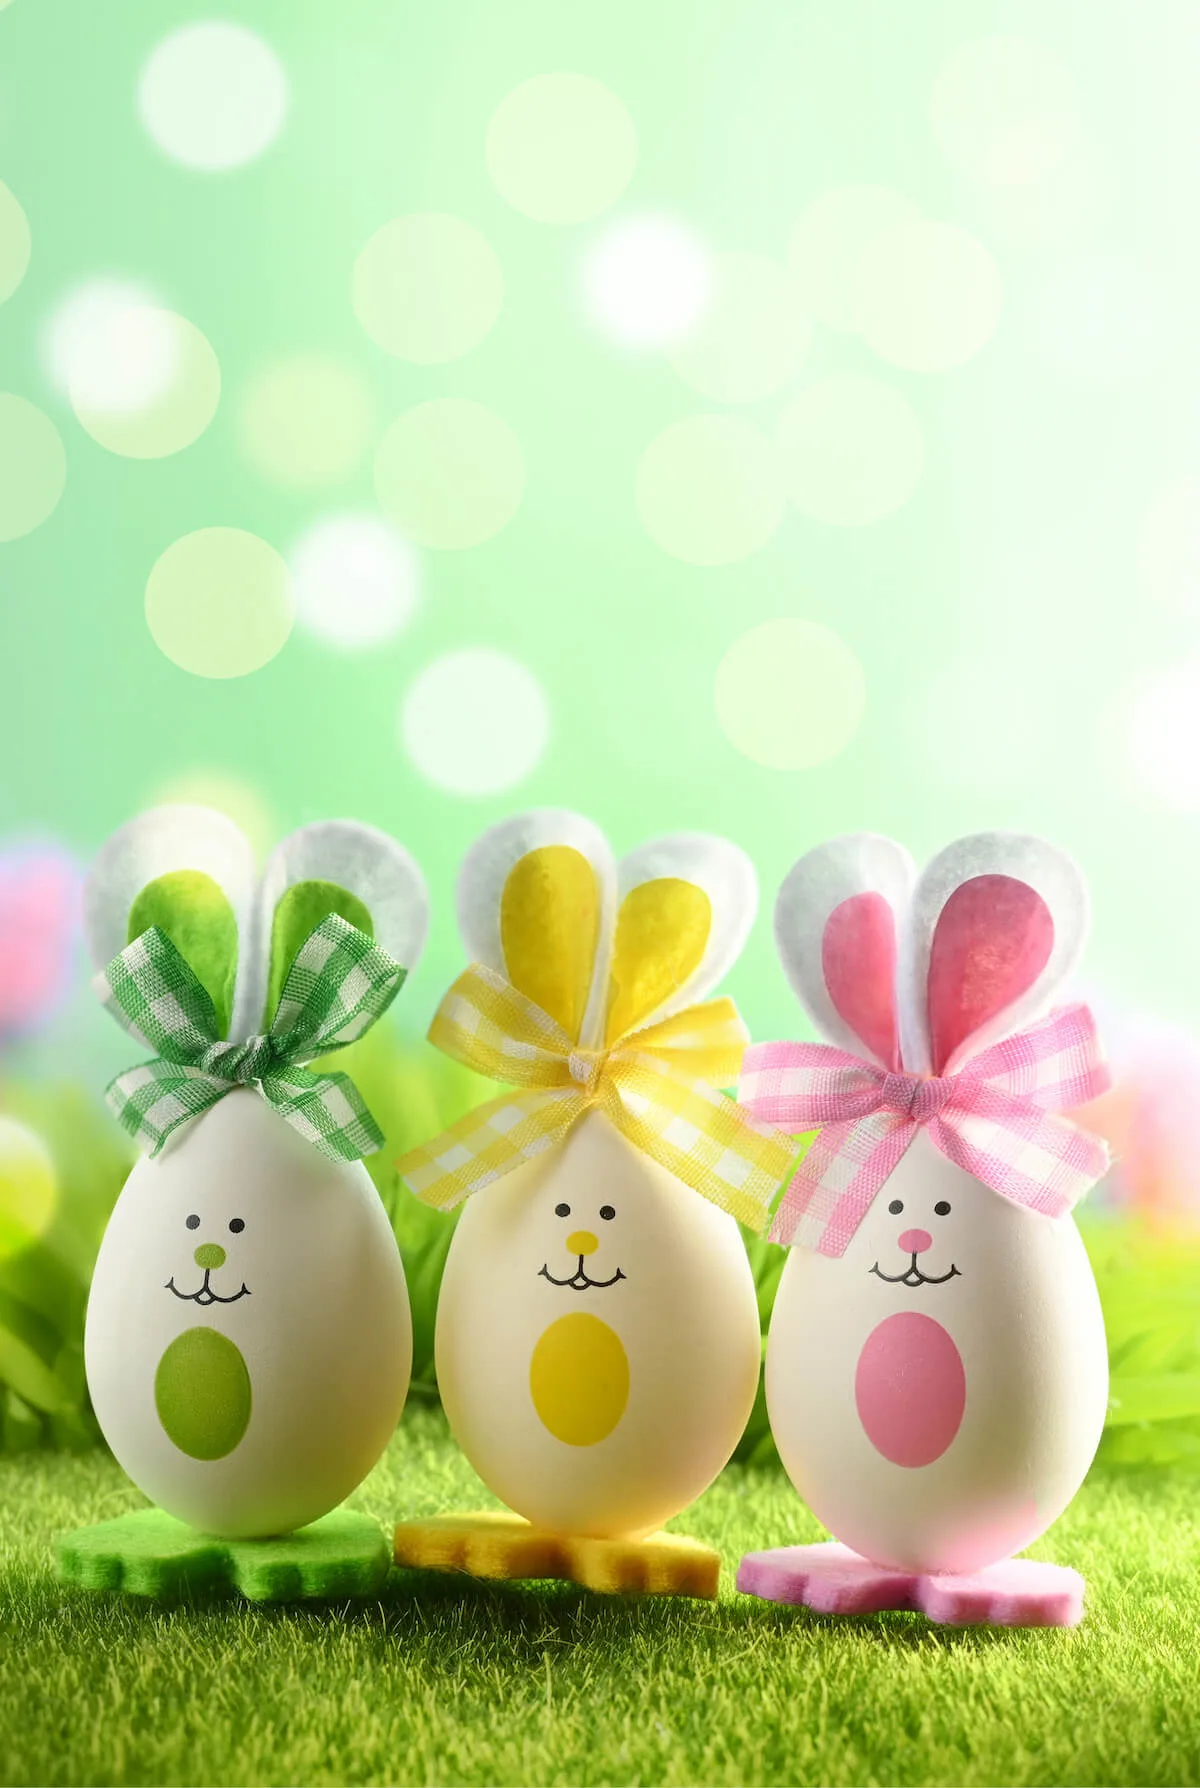 Eggs decorated to look like little bunnies